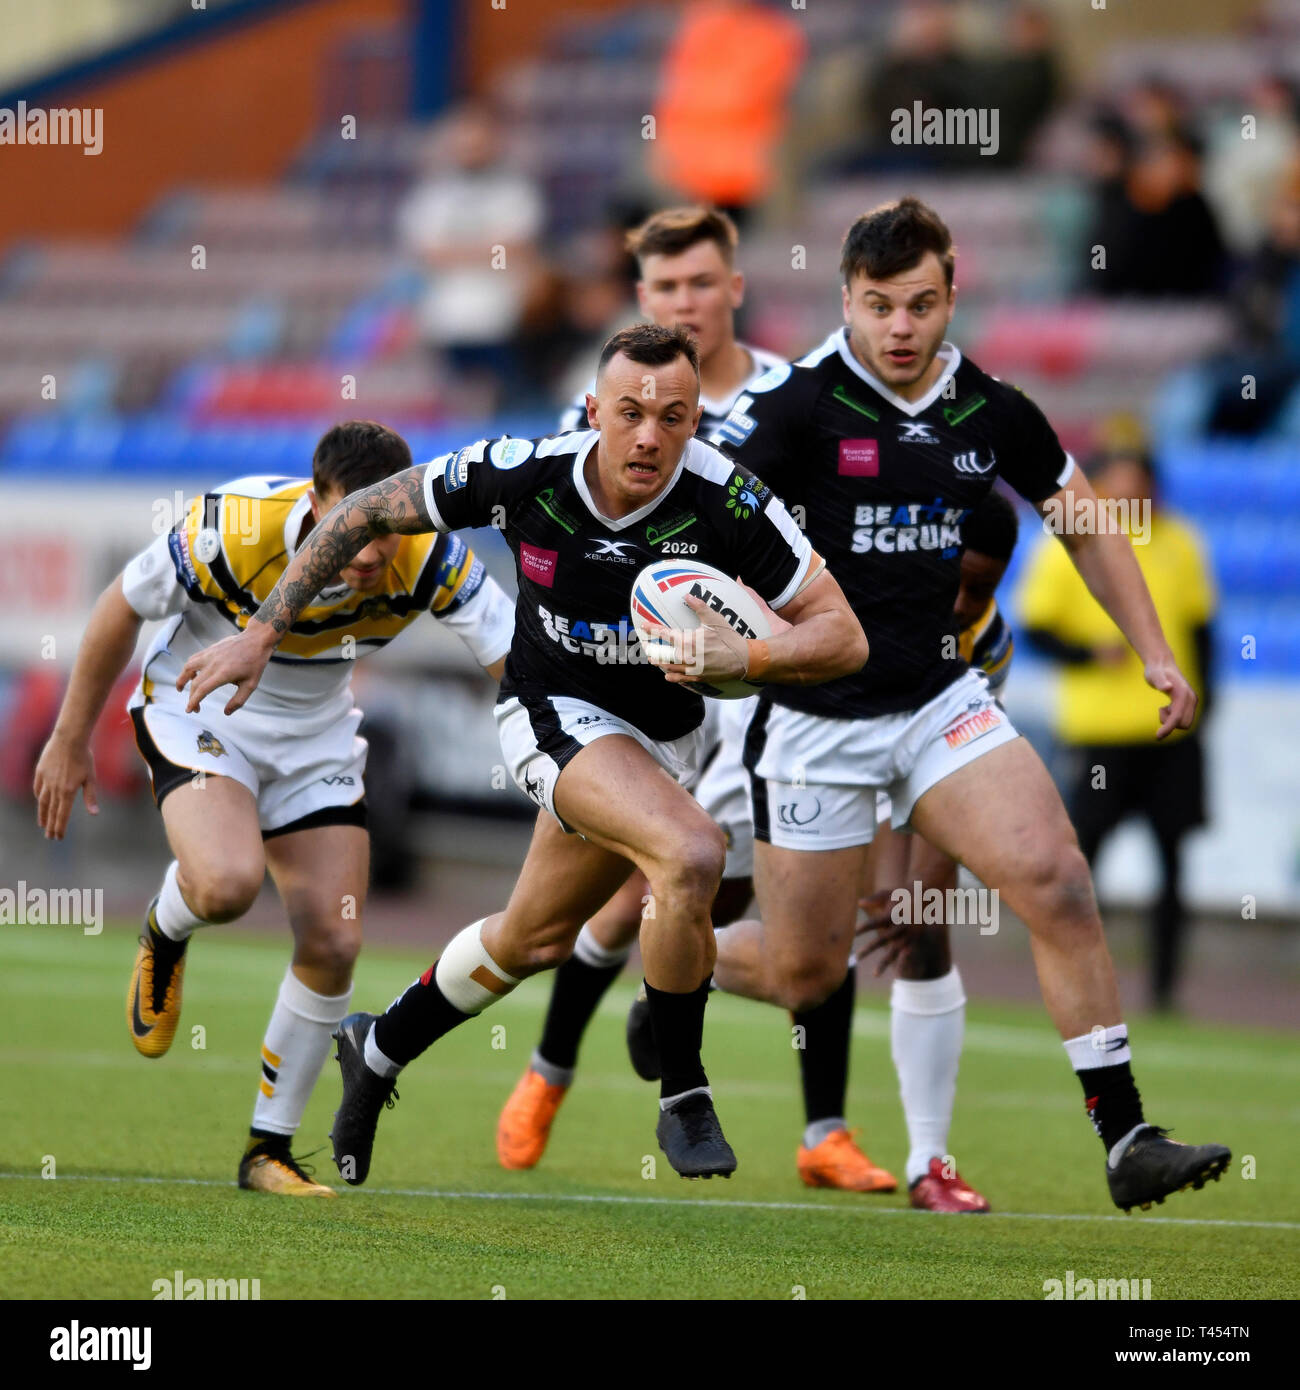 Halton Stadium, Widnes, UK. 13th Apr, 2019. Coral Challenge Cup rugby, Widnes Vikings versus York City Knights; Danny Craven of Widnes Vikings breaks through the York City Knights defensive line Credit: Action Plus Sports/Alamy Live News Stock Photo